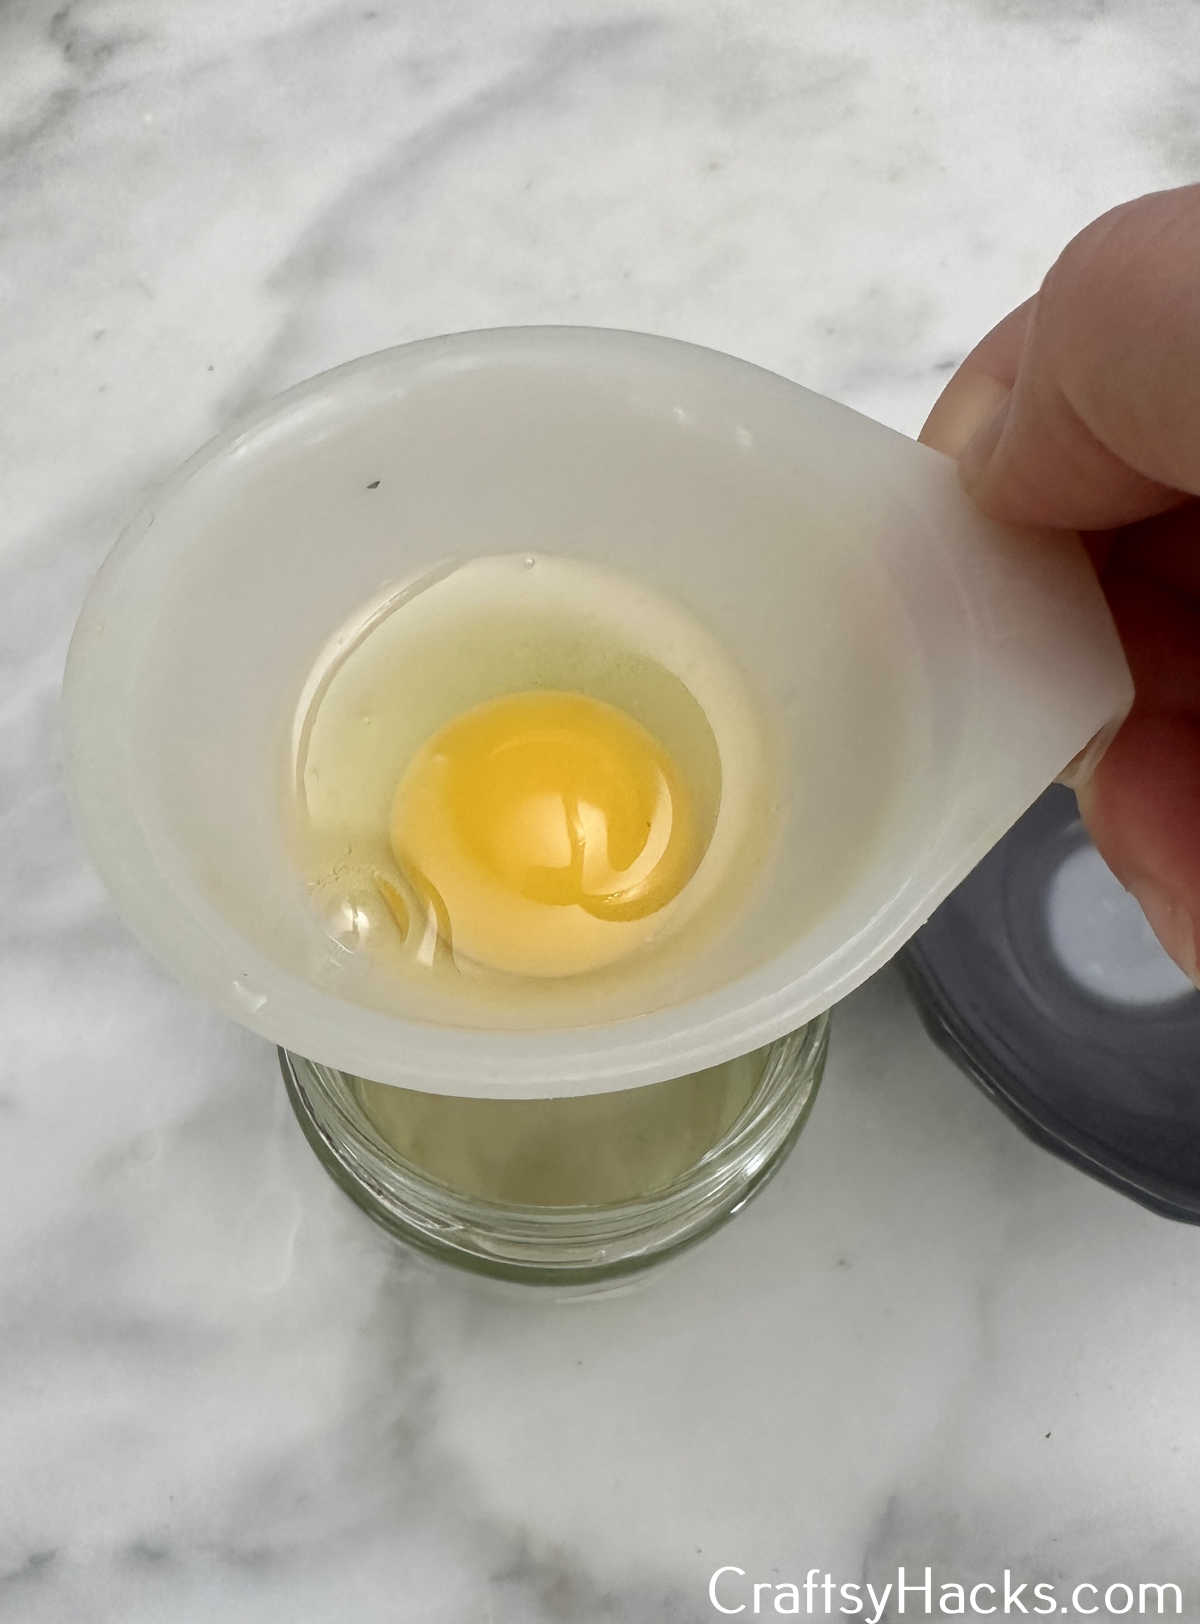 use funnel to seperate yolk from egg white